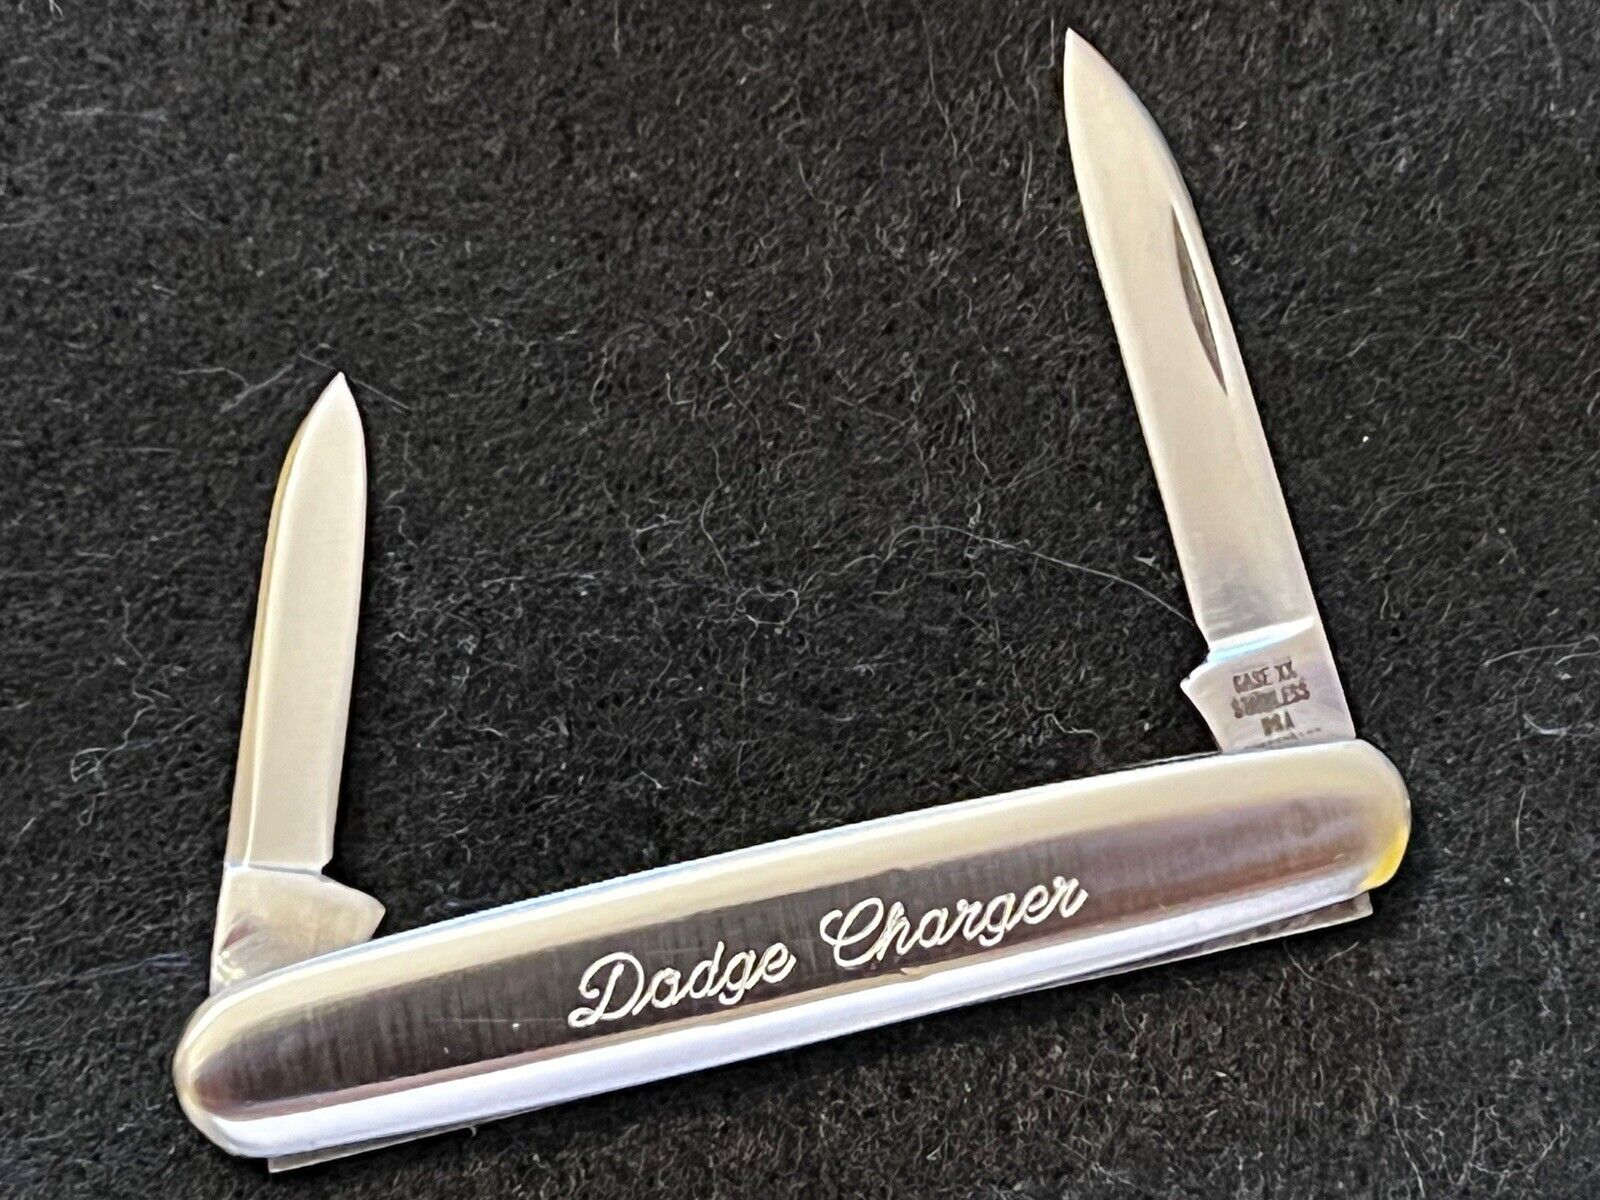 Vintage Case XX USA 1970/10……….Dot Dodge Charger All Stainless 3-1/8” Knife XCLN